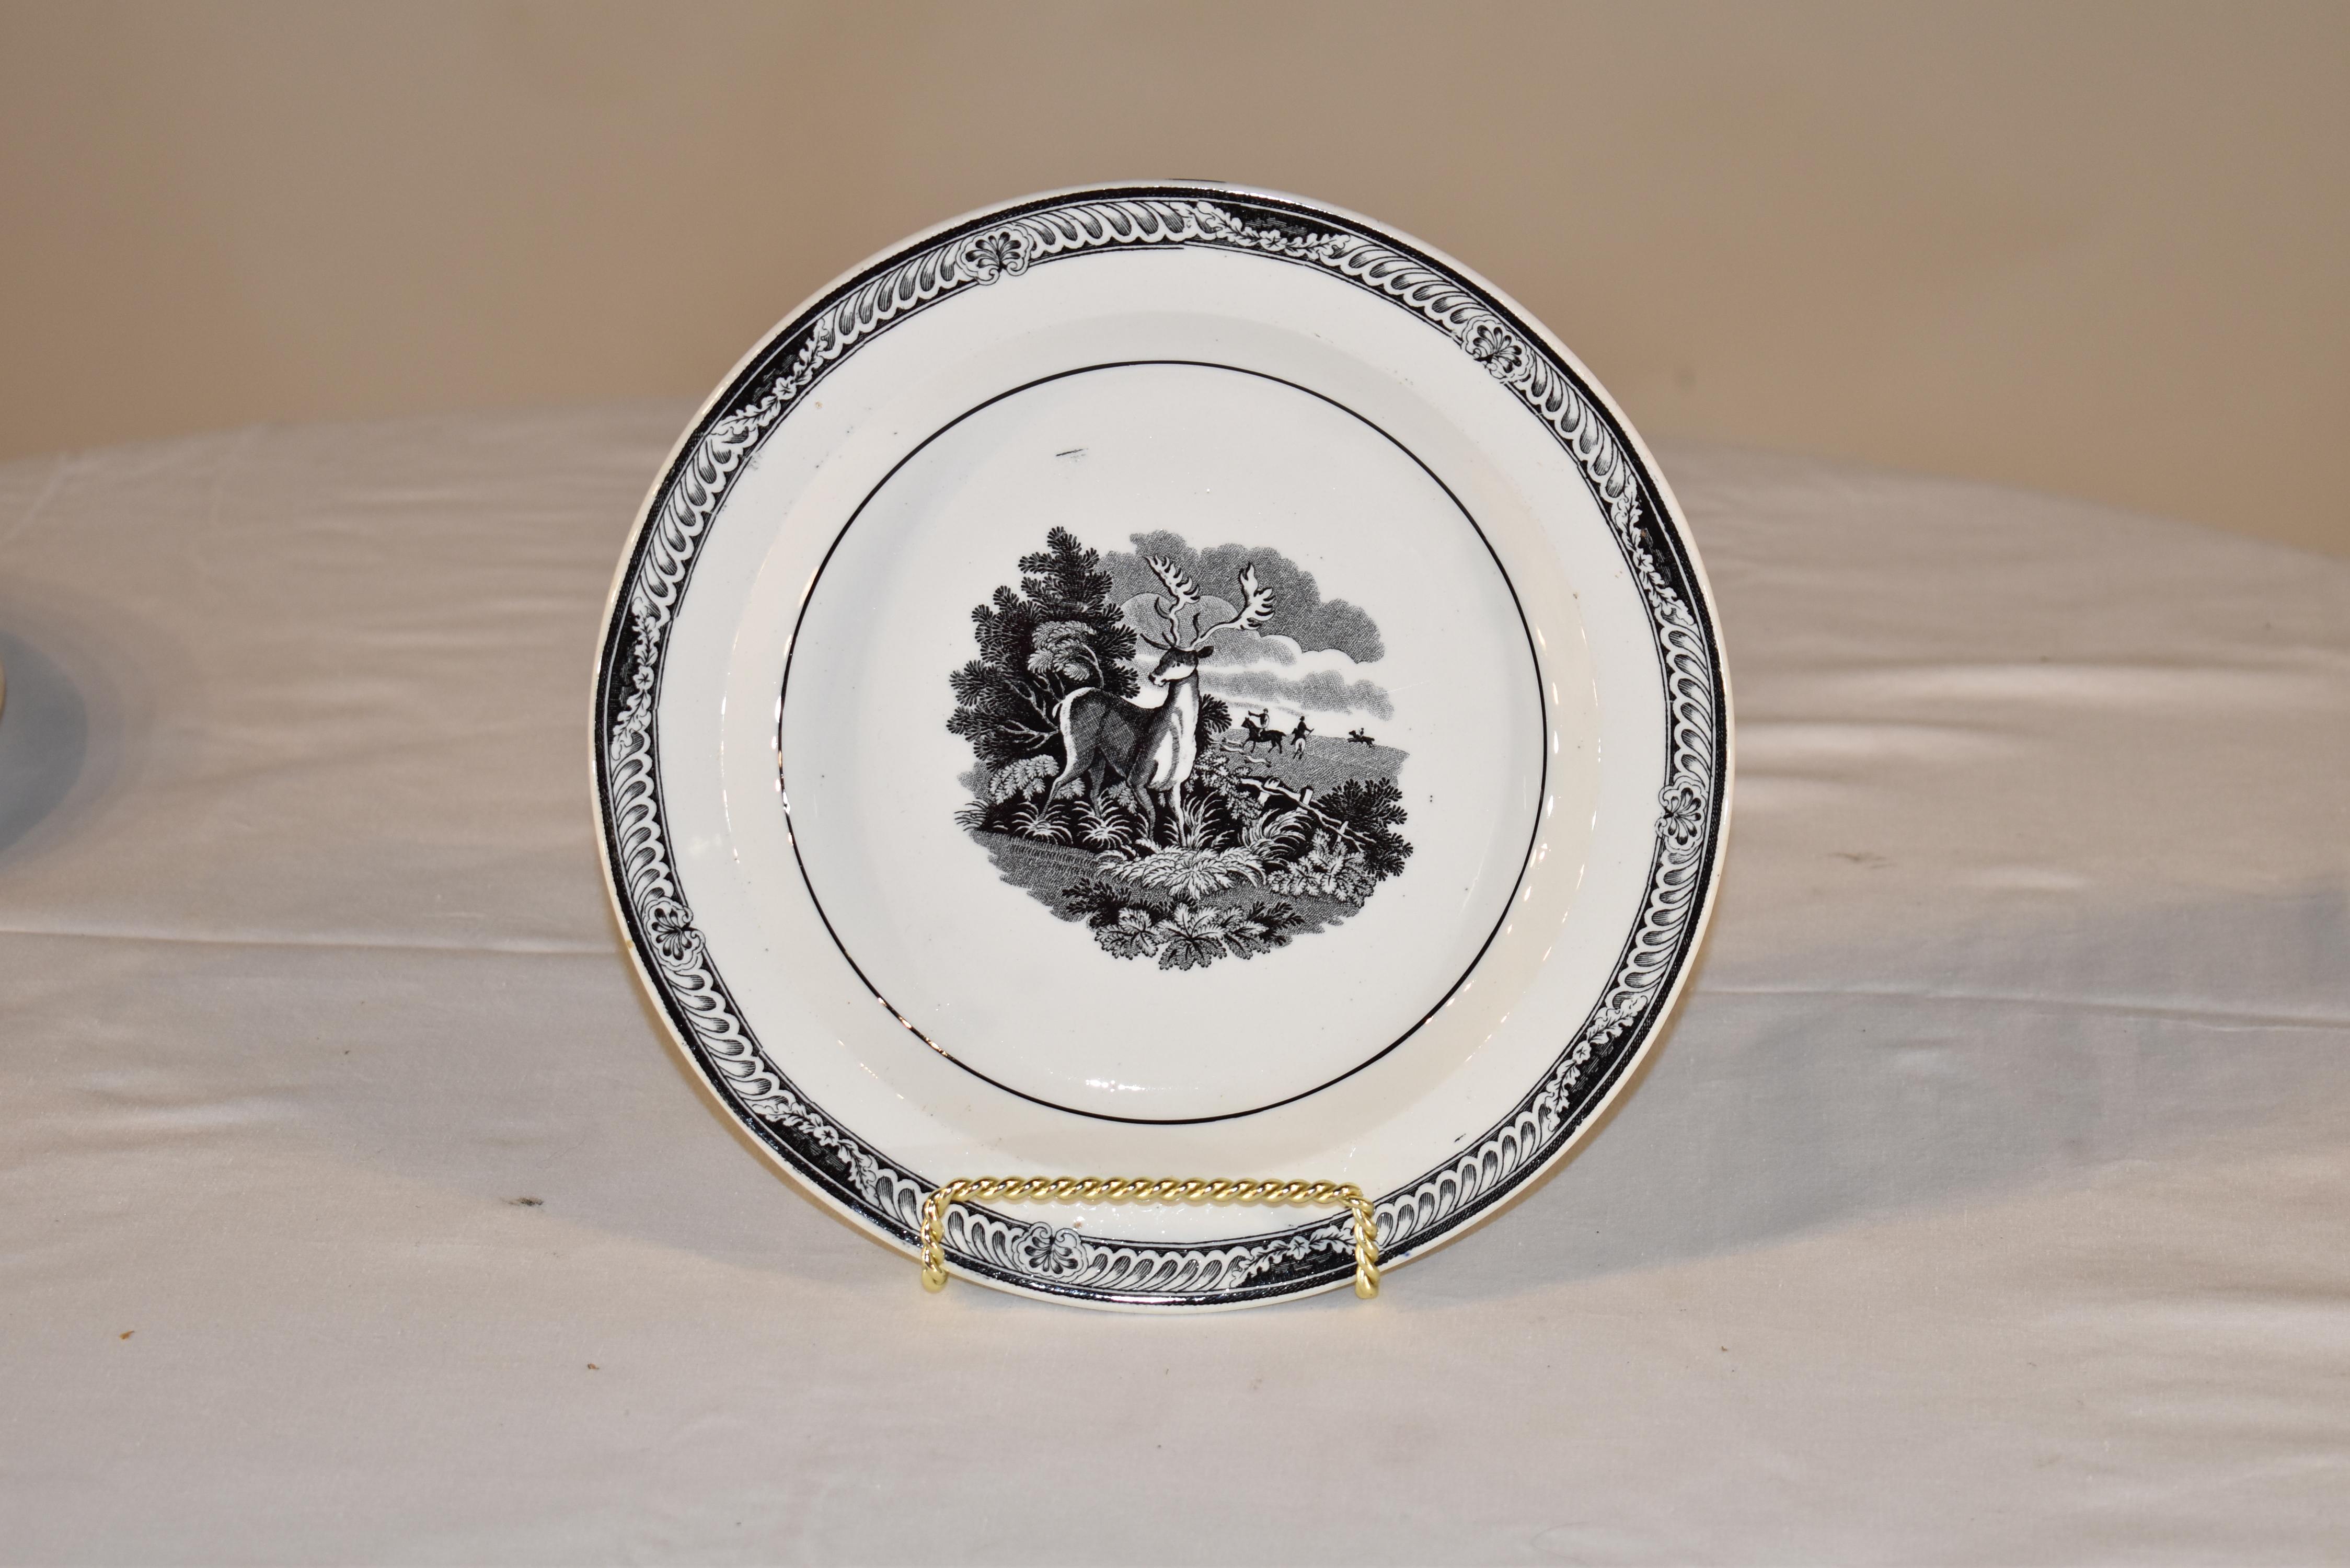 English Pair of Early 19th Century Staffordshire Plates with Stags For Sale